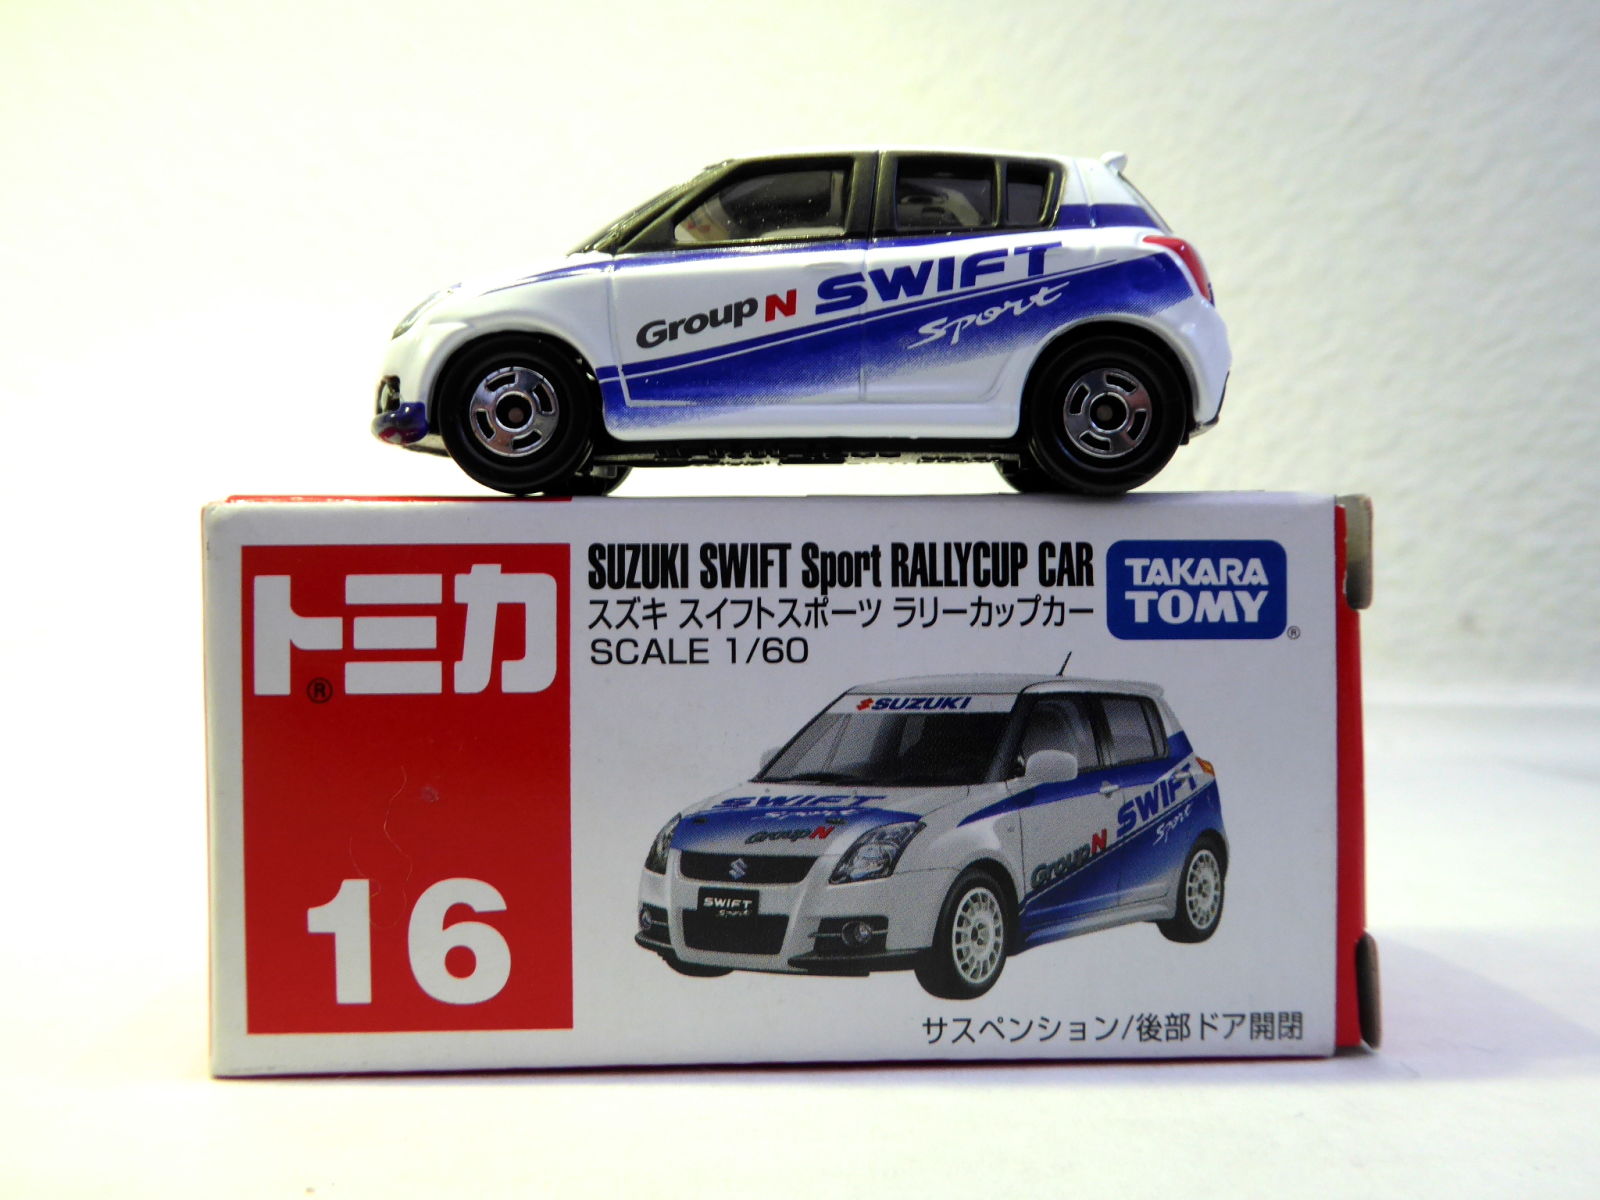 Illustration for article titled Hot Sixty 4th: Suzuki Swift Sport Saturday